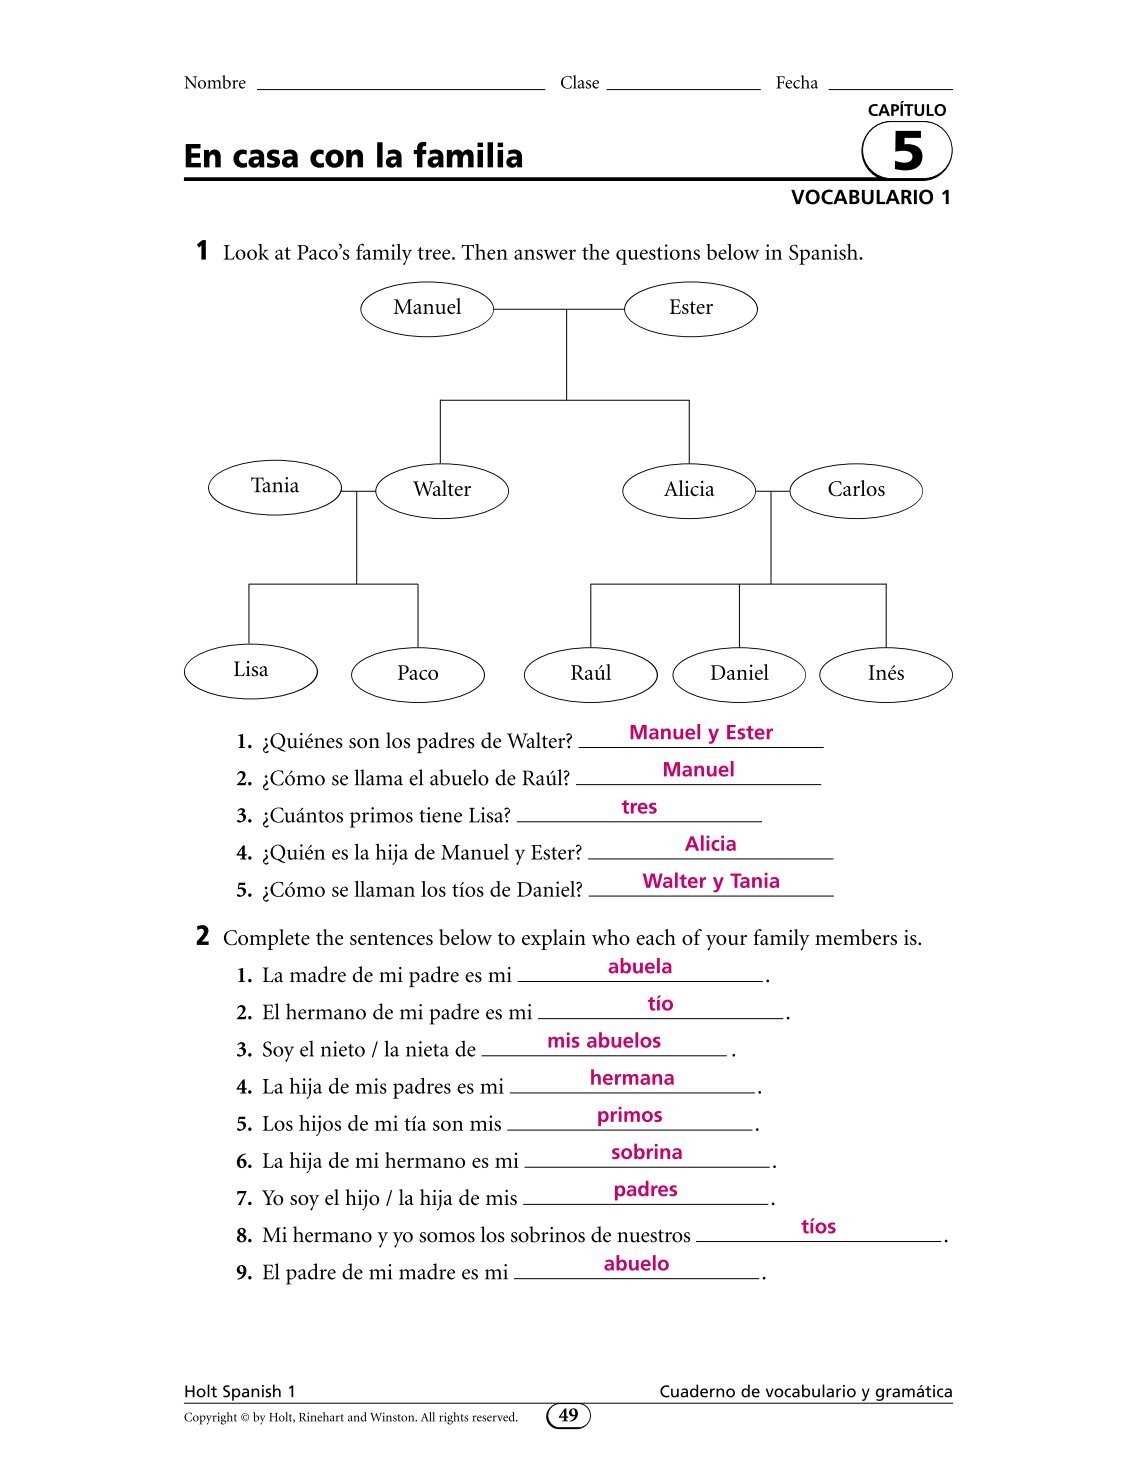 Overview of Holt Spanish 2 Workbook Answers Chapter 1